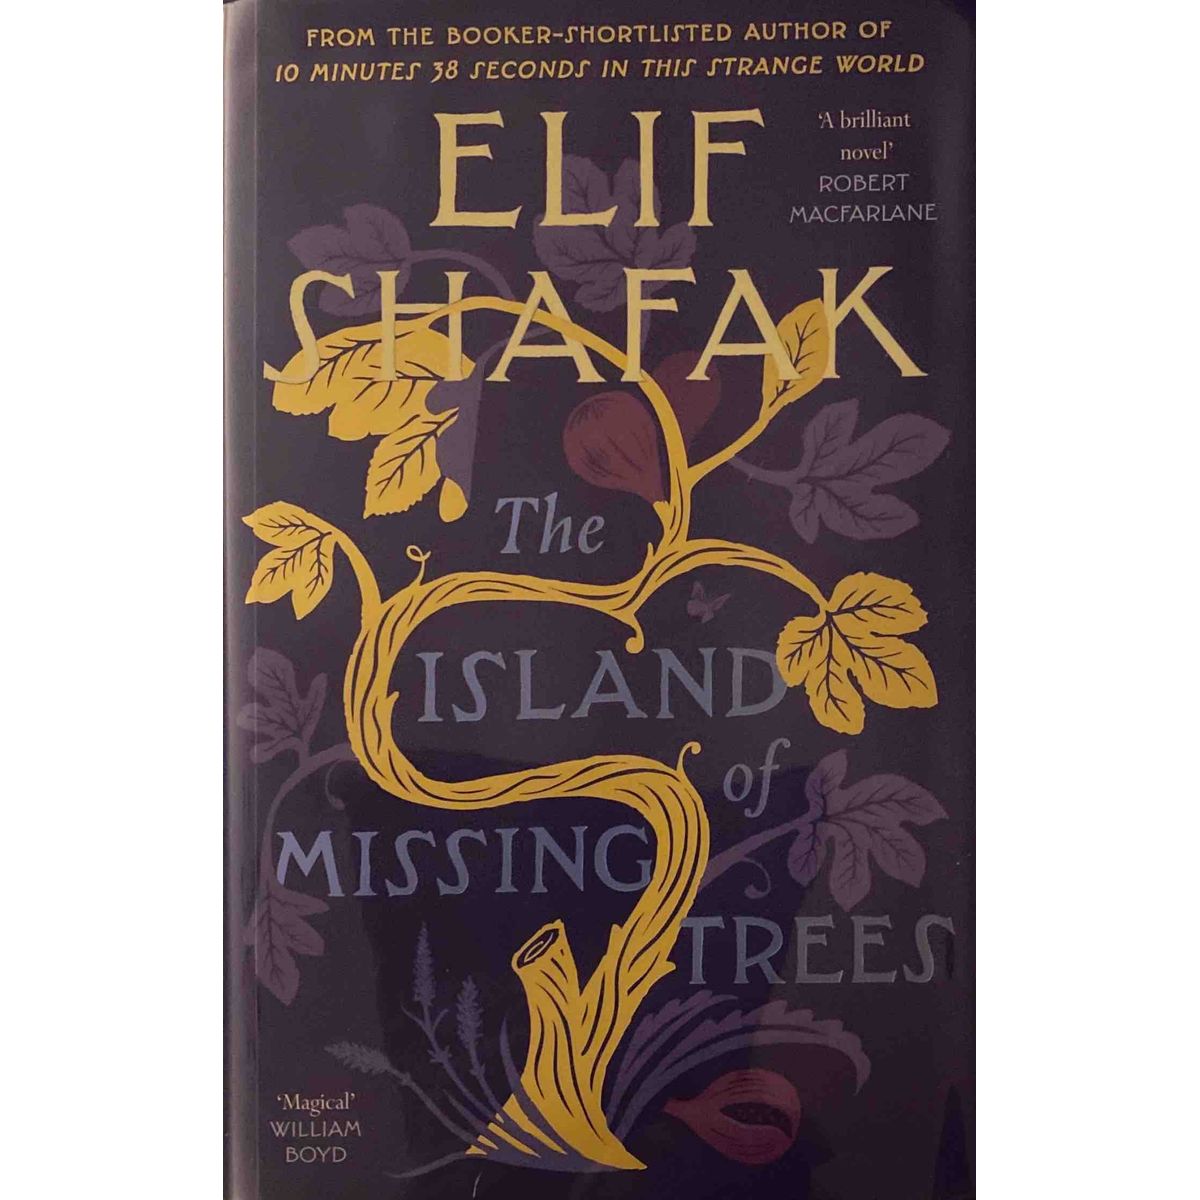 ISBN: 9780241435007 / 0241435005 - The Island of Missing Trees by Elif Shafak [2021]